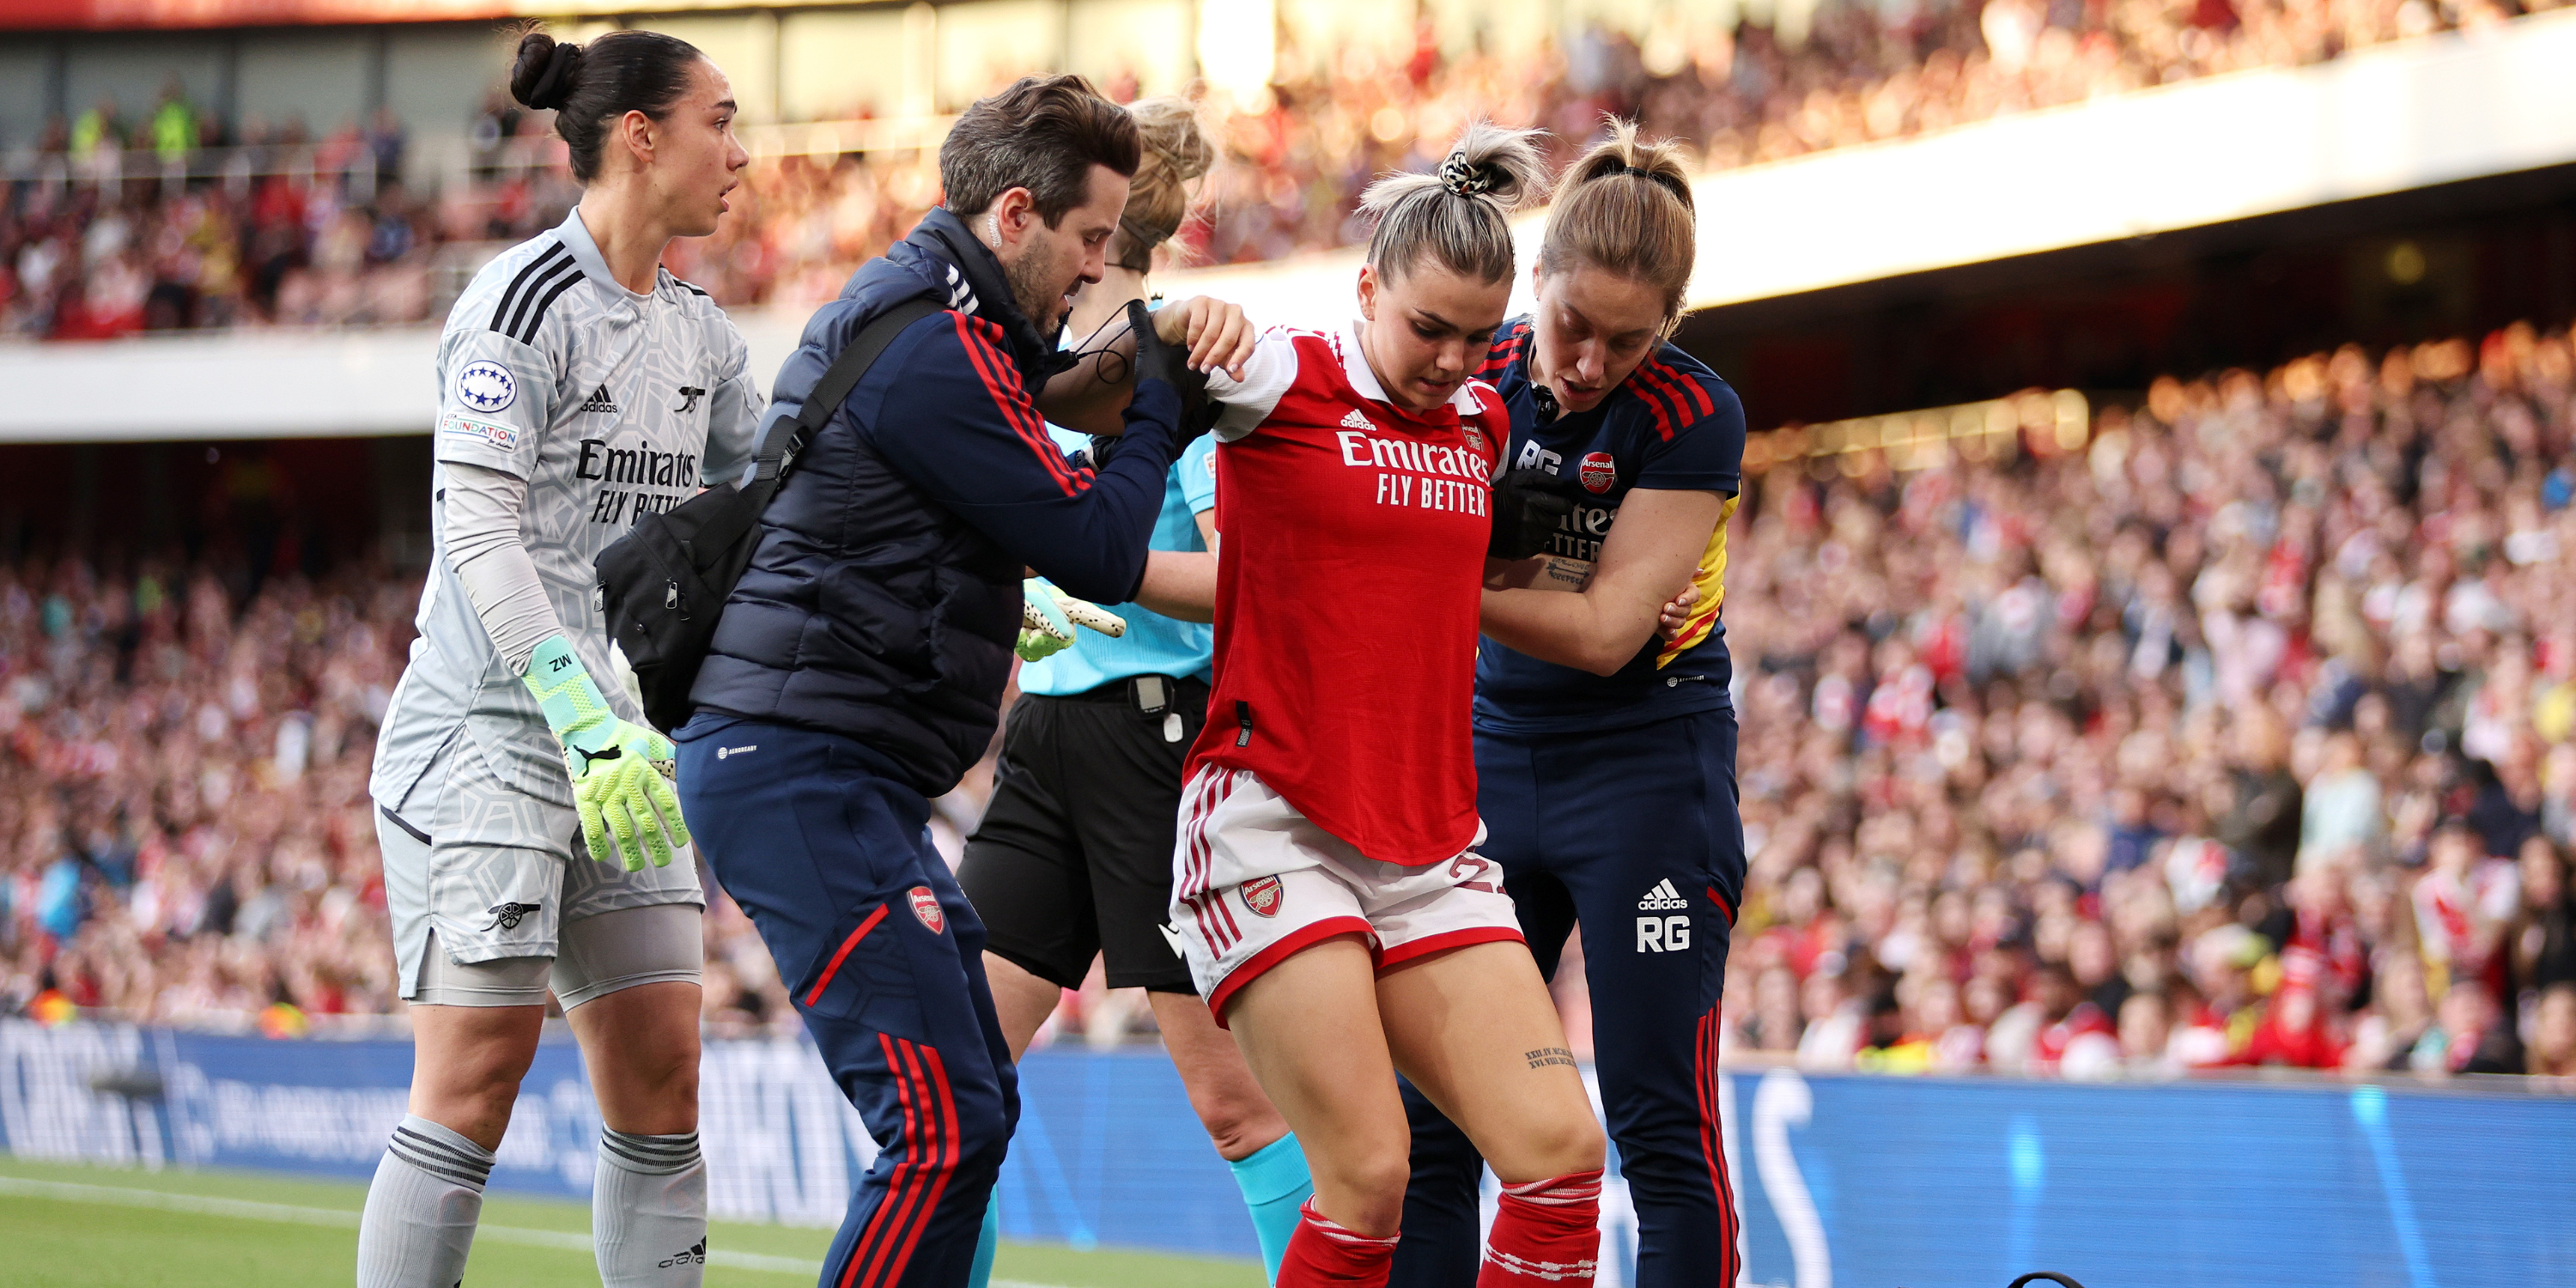 Arsenal's Laura Weinroither tears her ACL against Wolfsburg